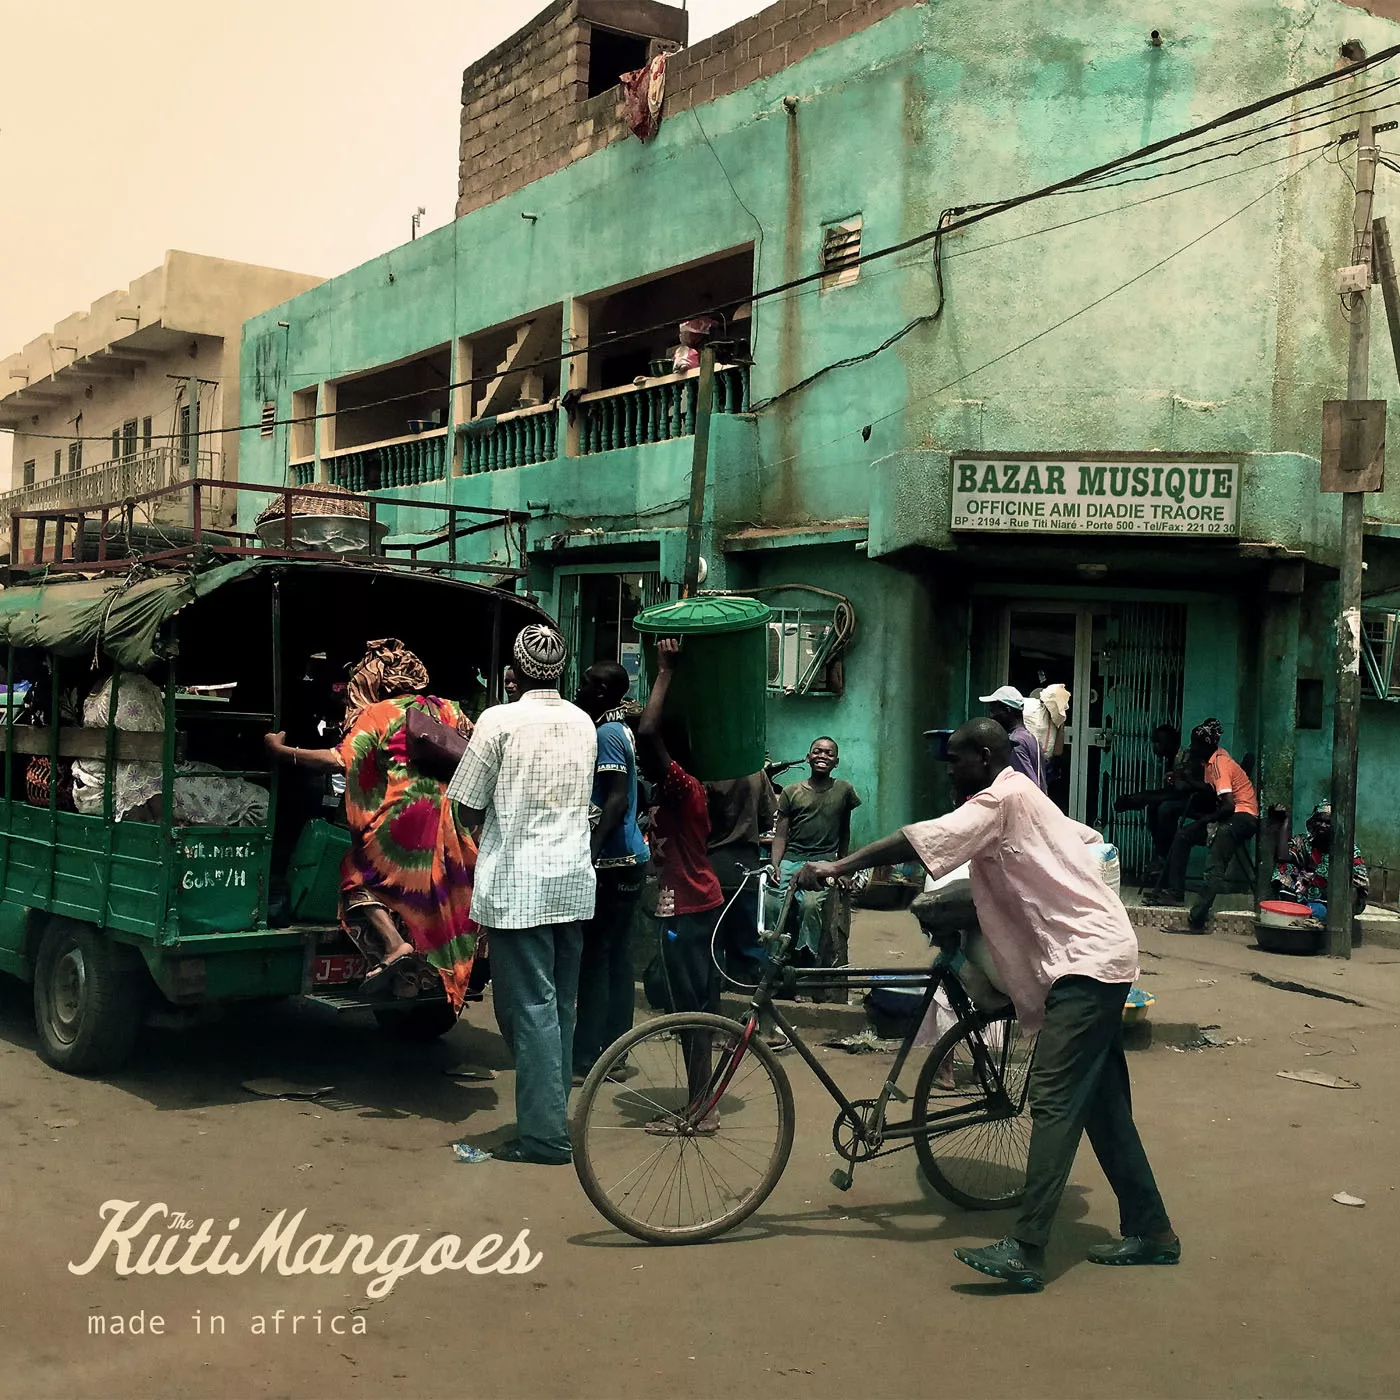 Made In Africa - The KutiMangoes